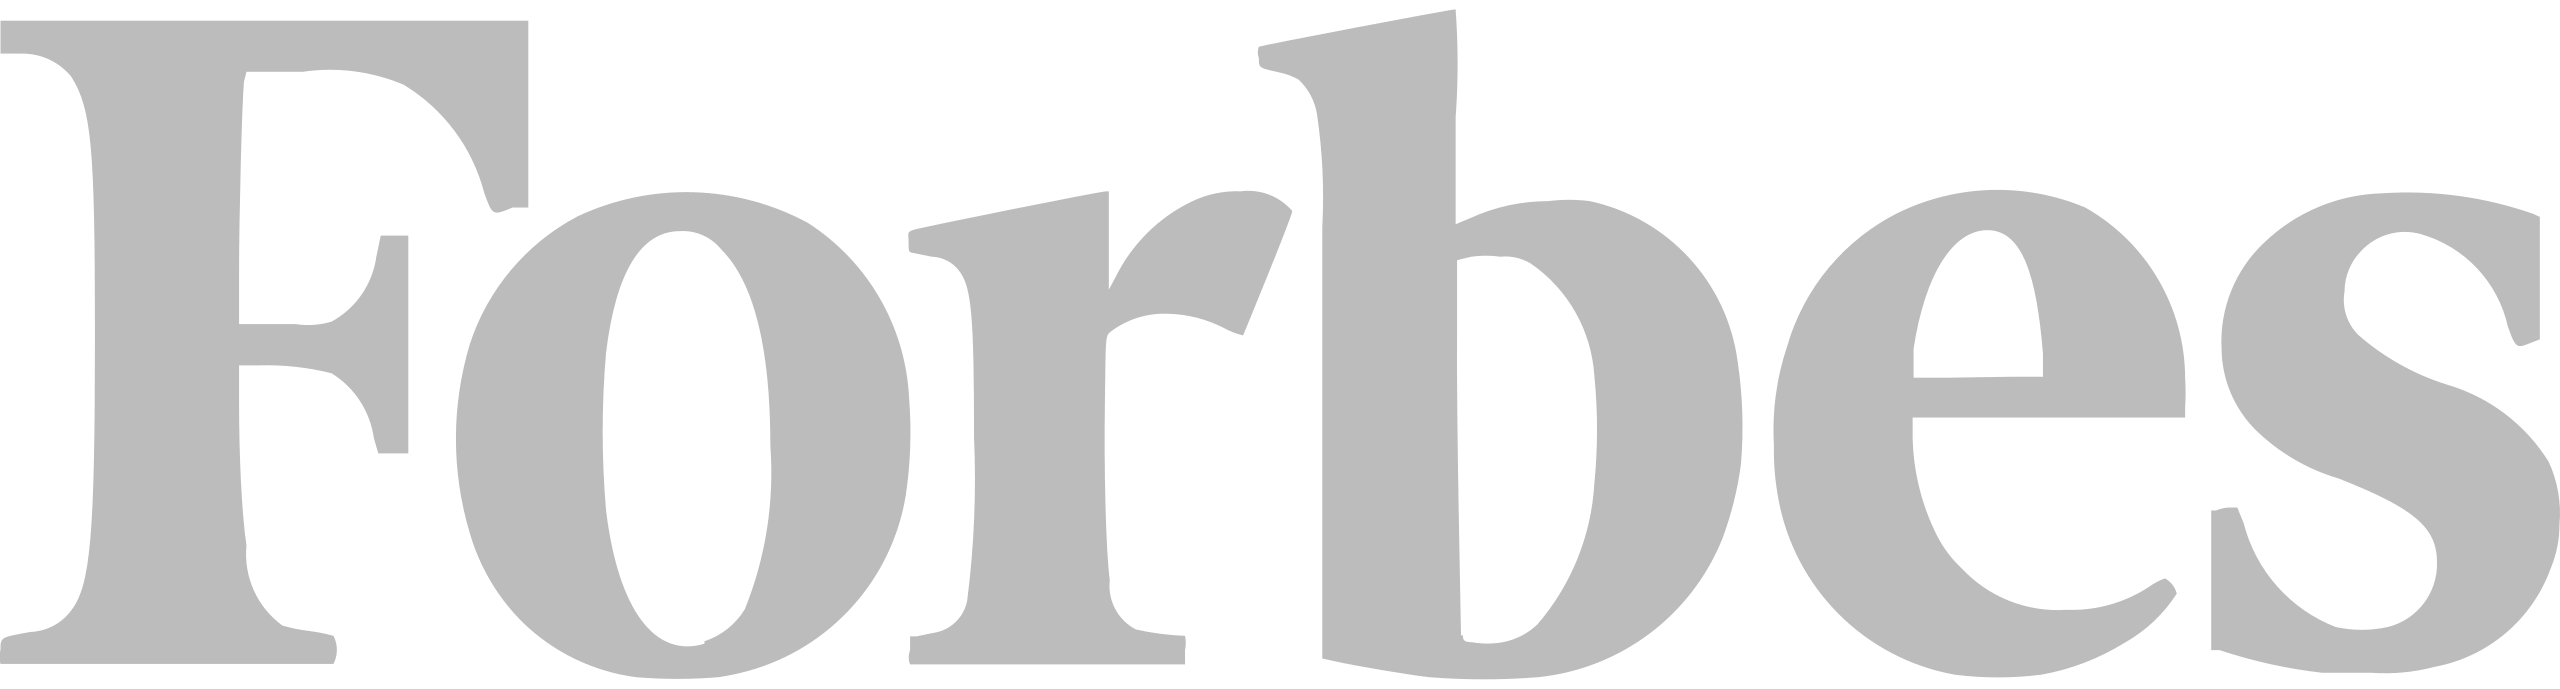 Transparent Gray Forbes Magazine logo on a solid white background in PNG format